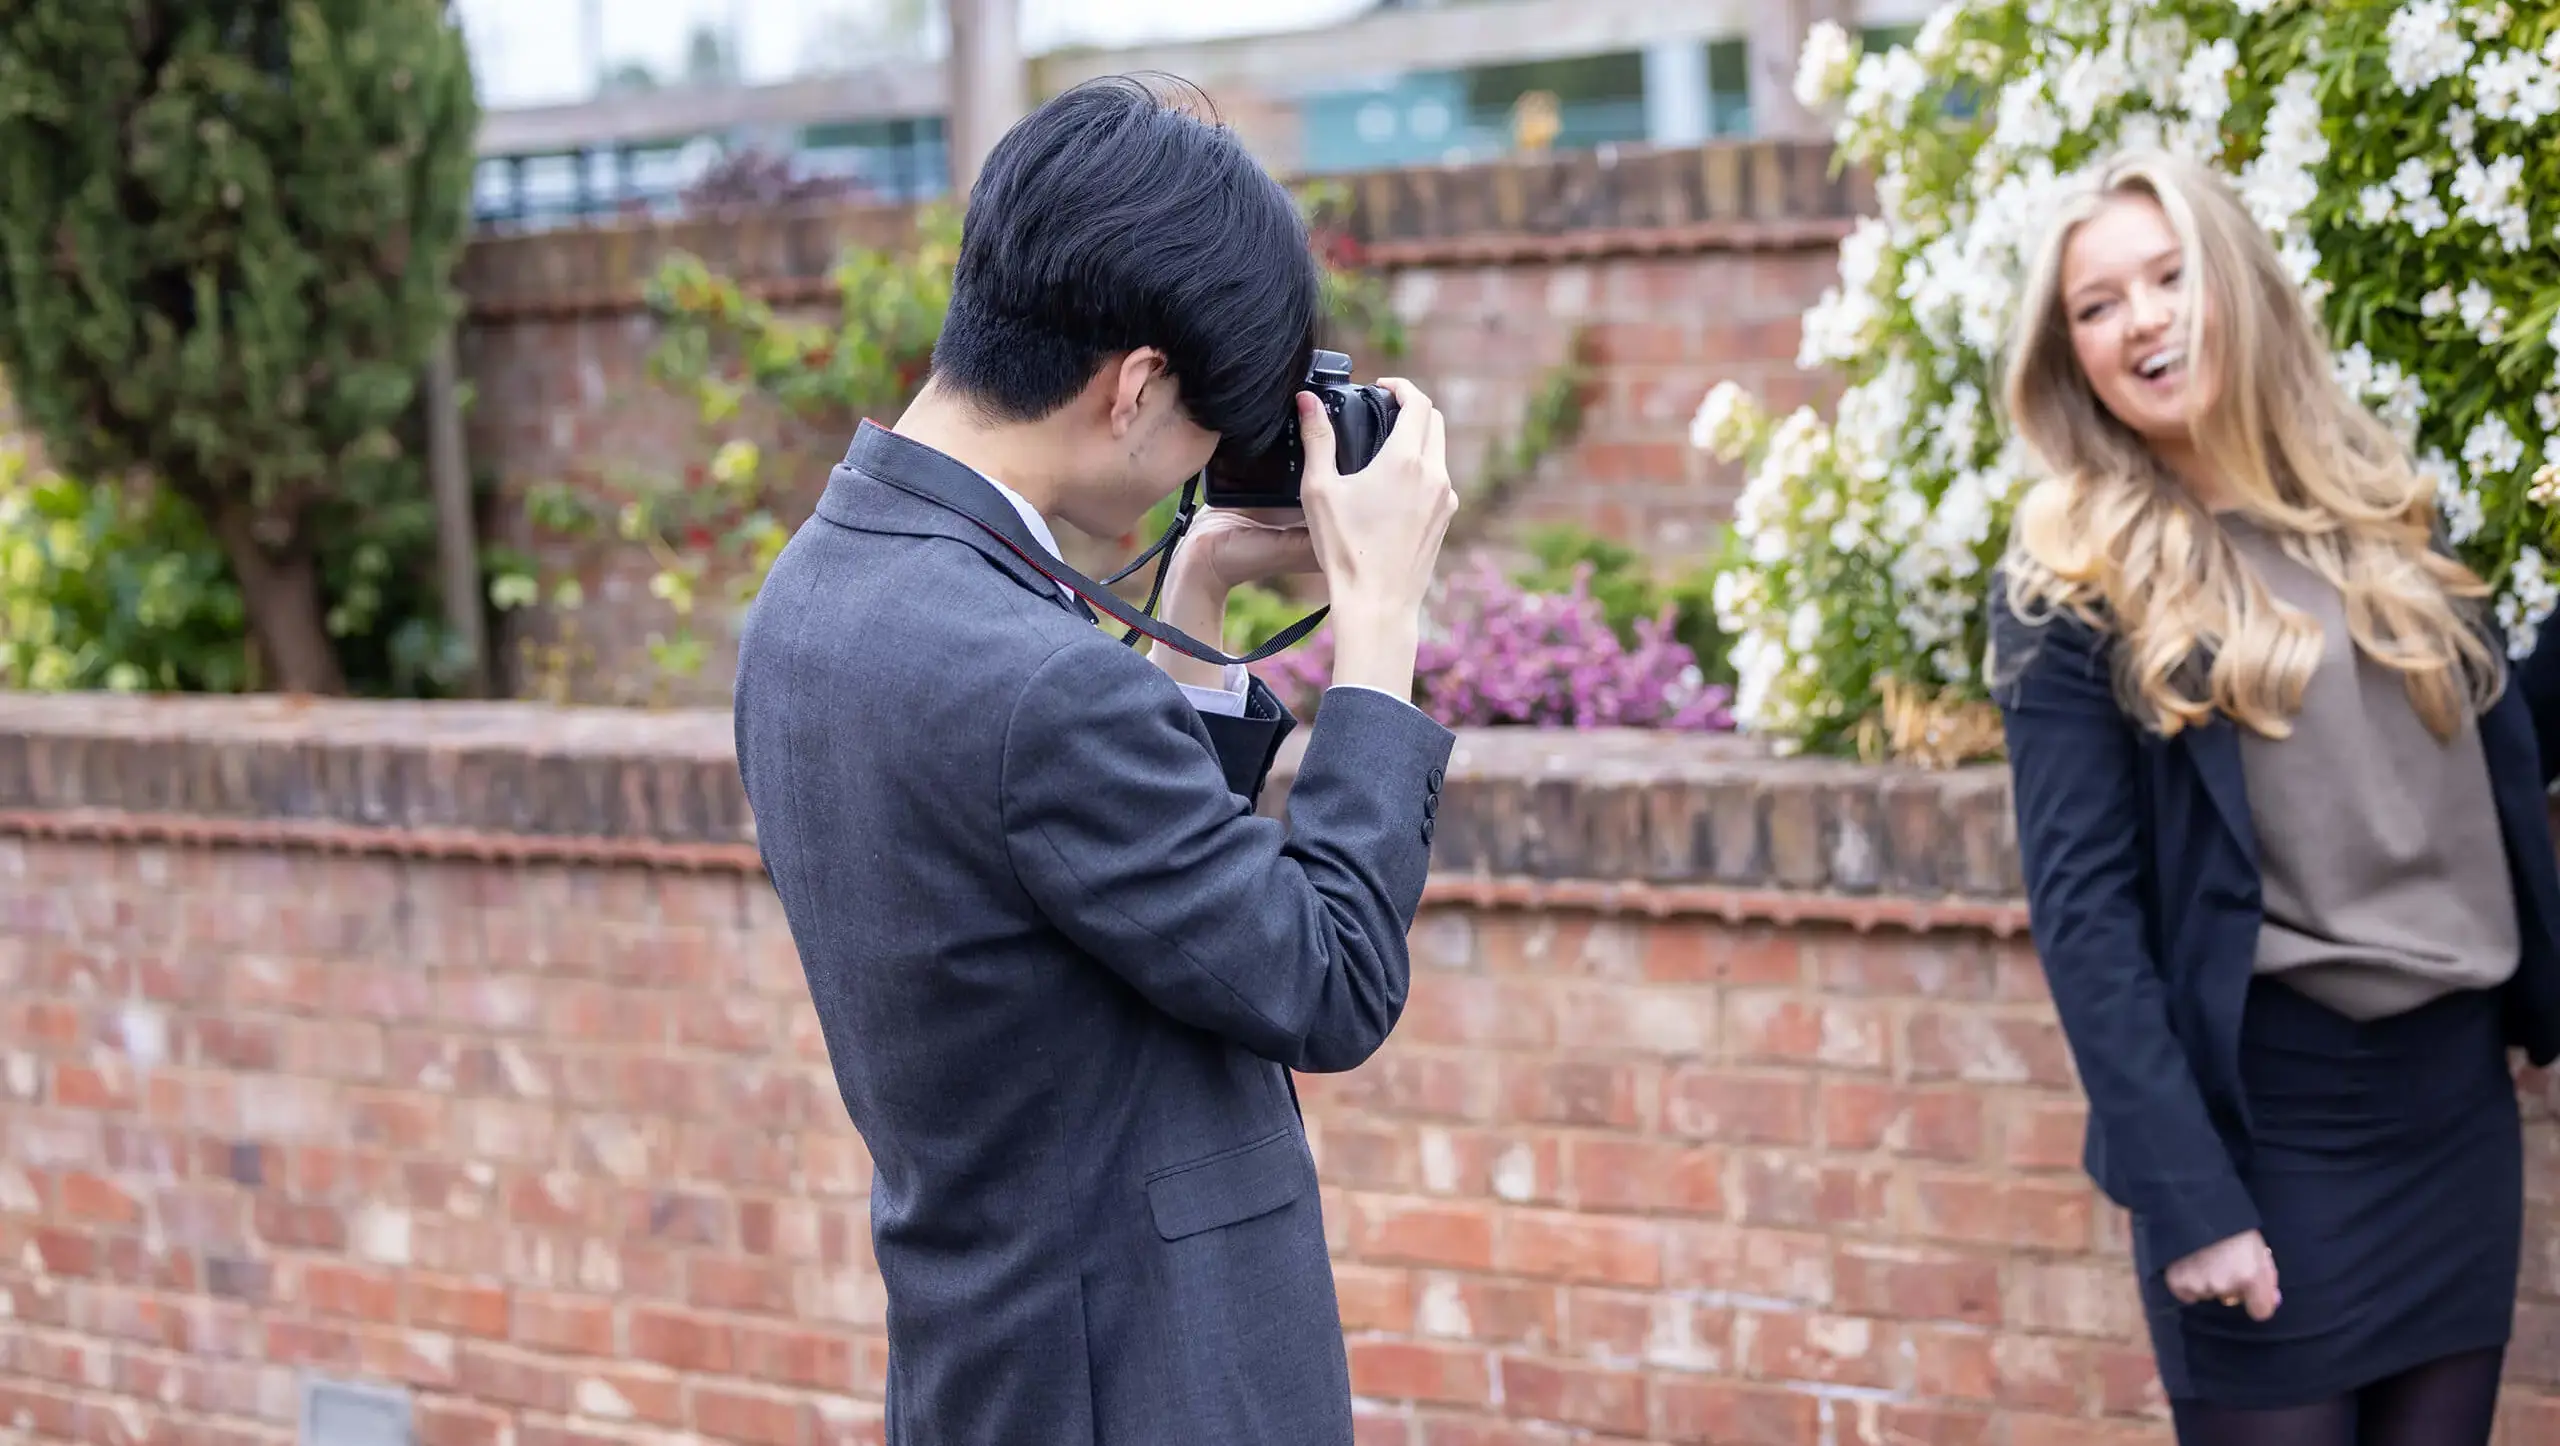 Senior school pupil taking a photograph of another pupil